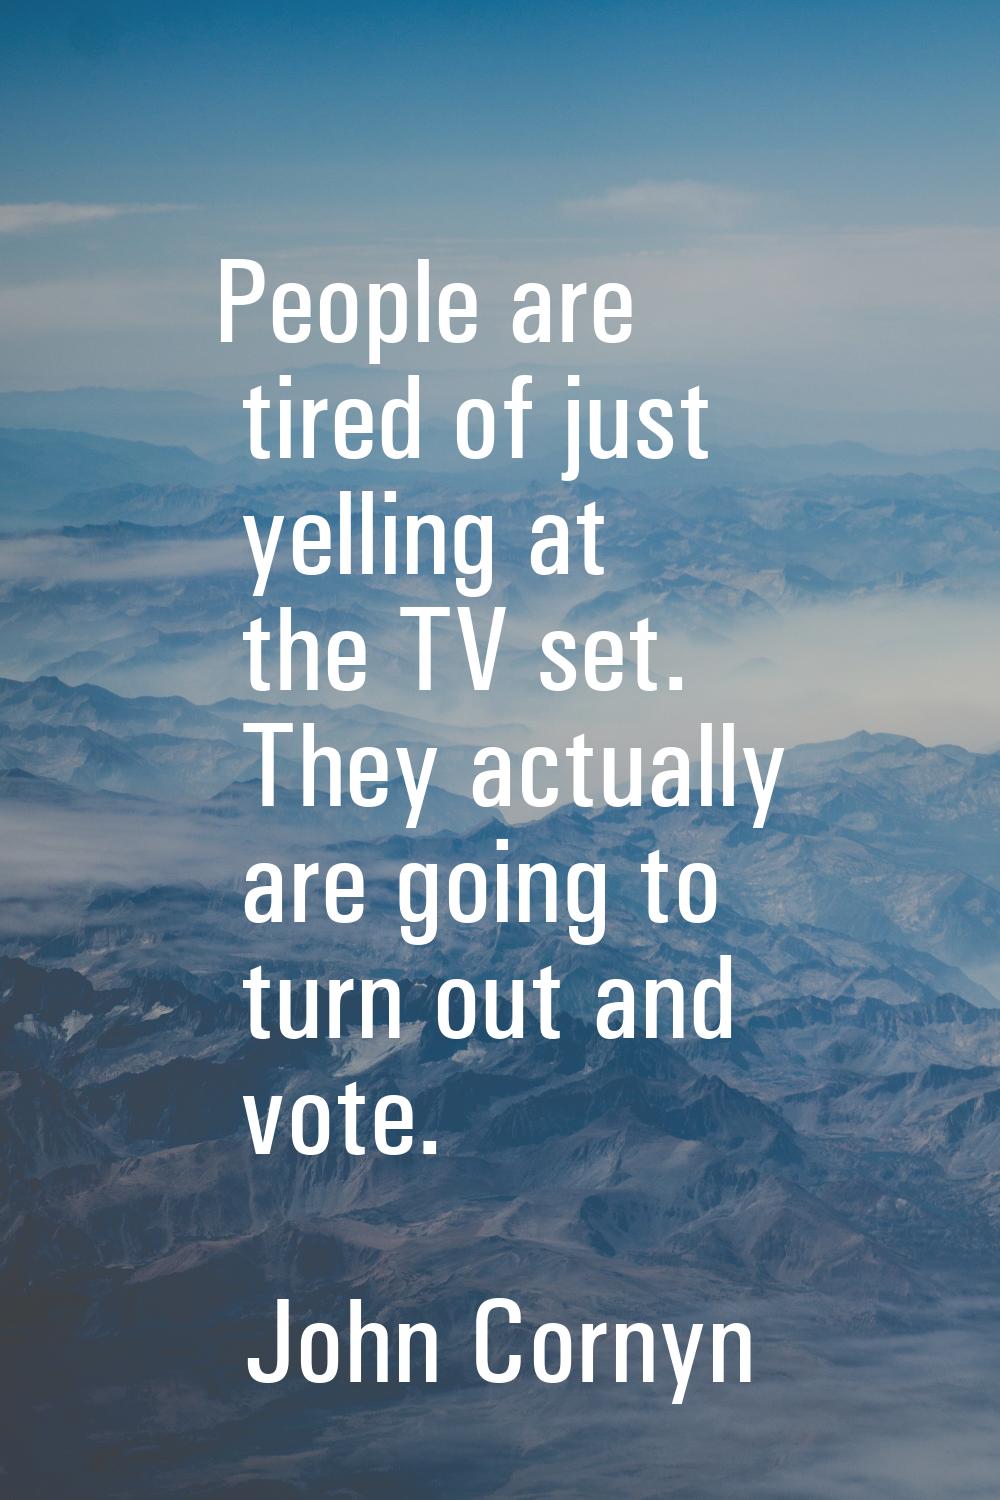 People are tired of just yelling at the TV set. They actually are going to turn out and vote.